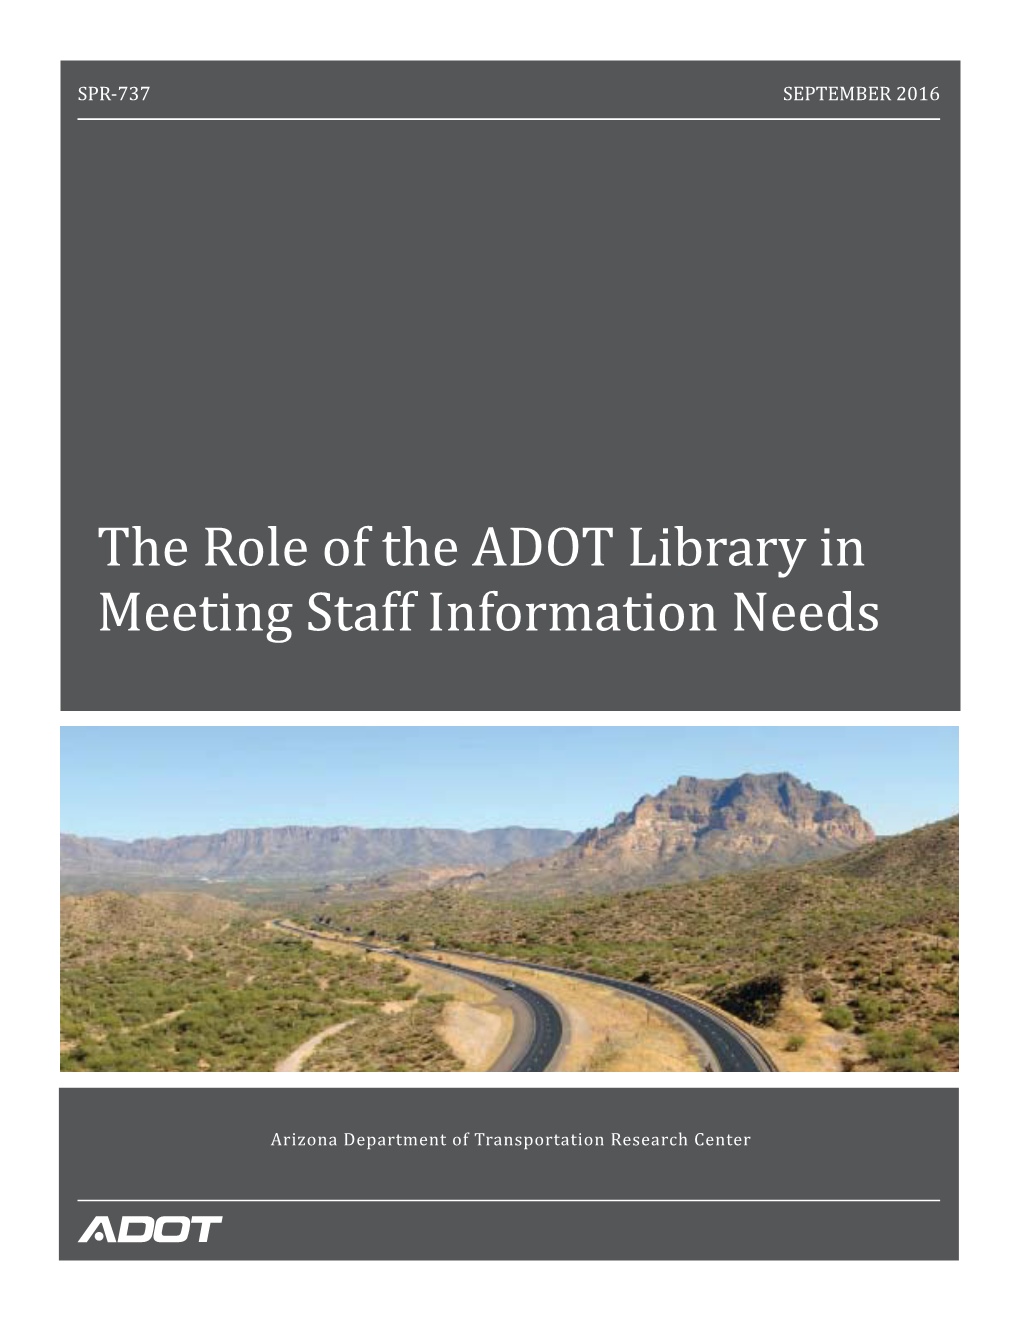 The Role of the ADOT Library in Meeting Staff Information Needs